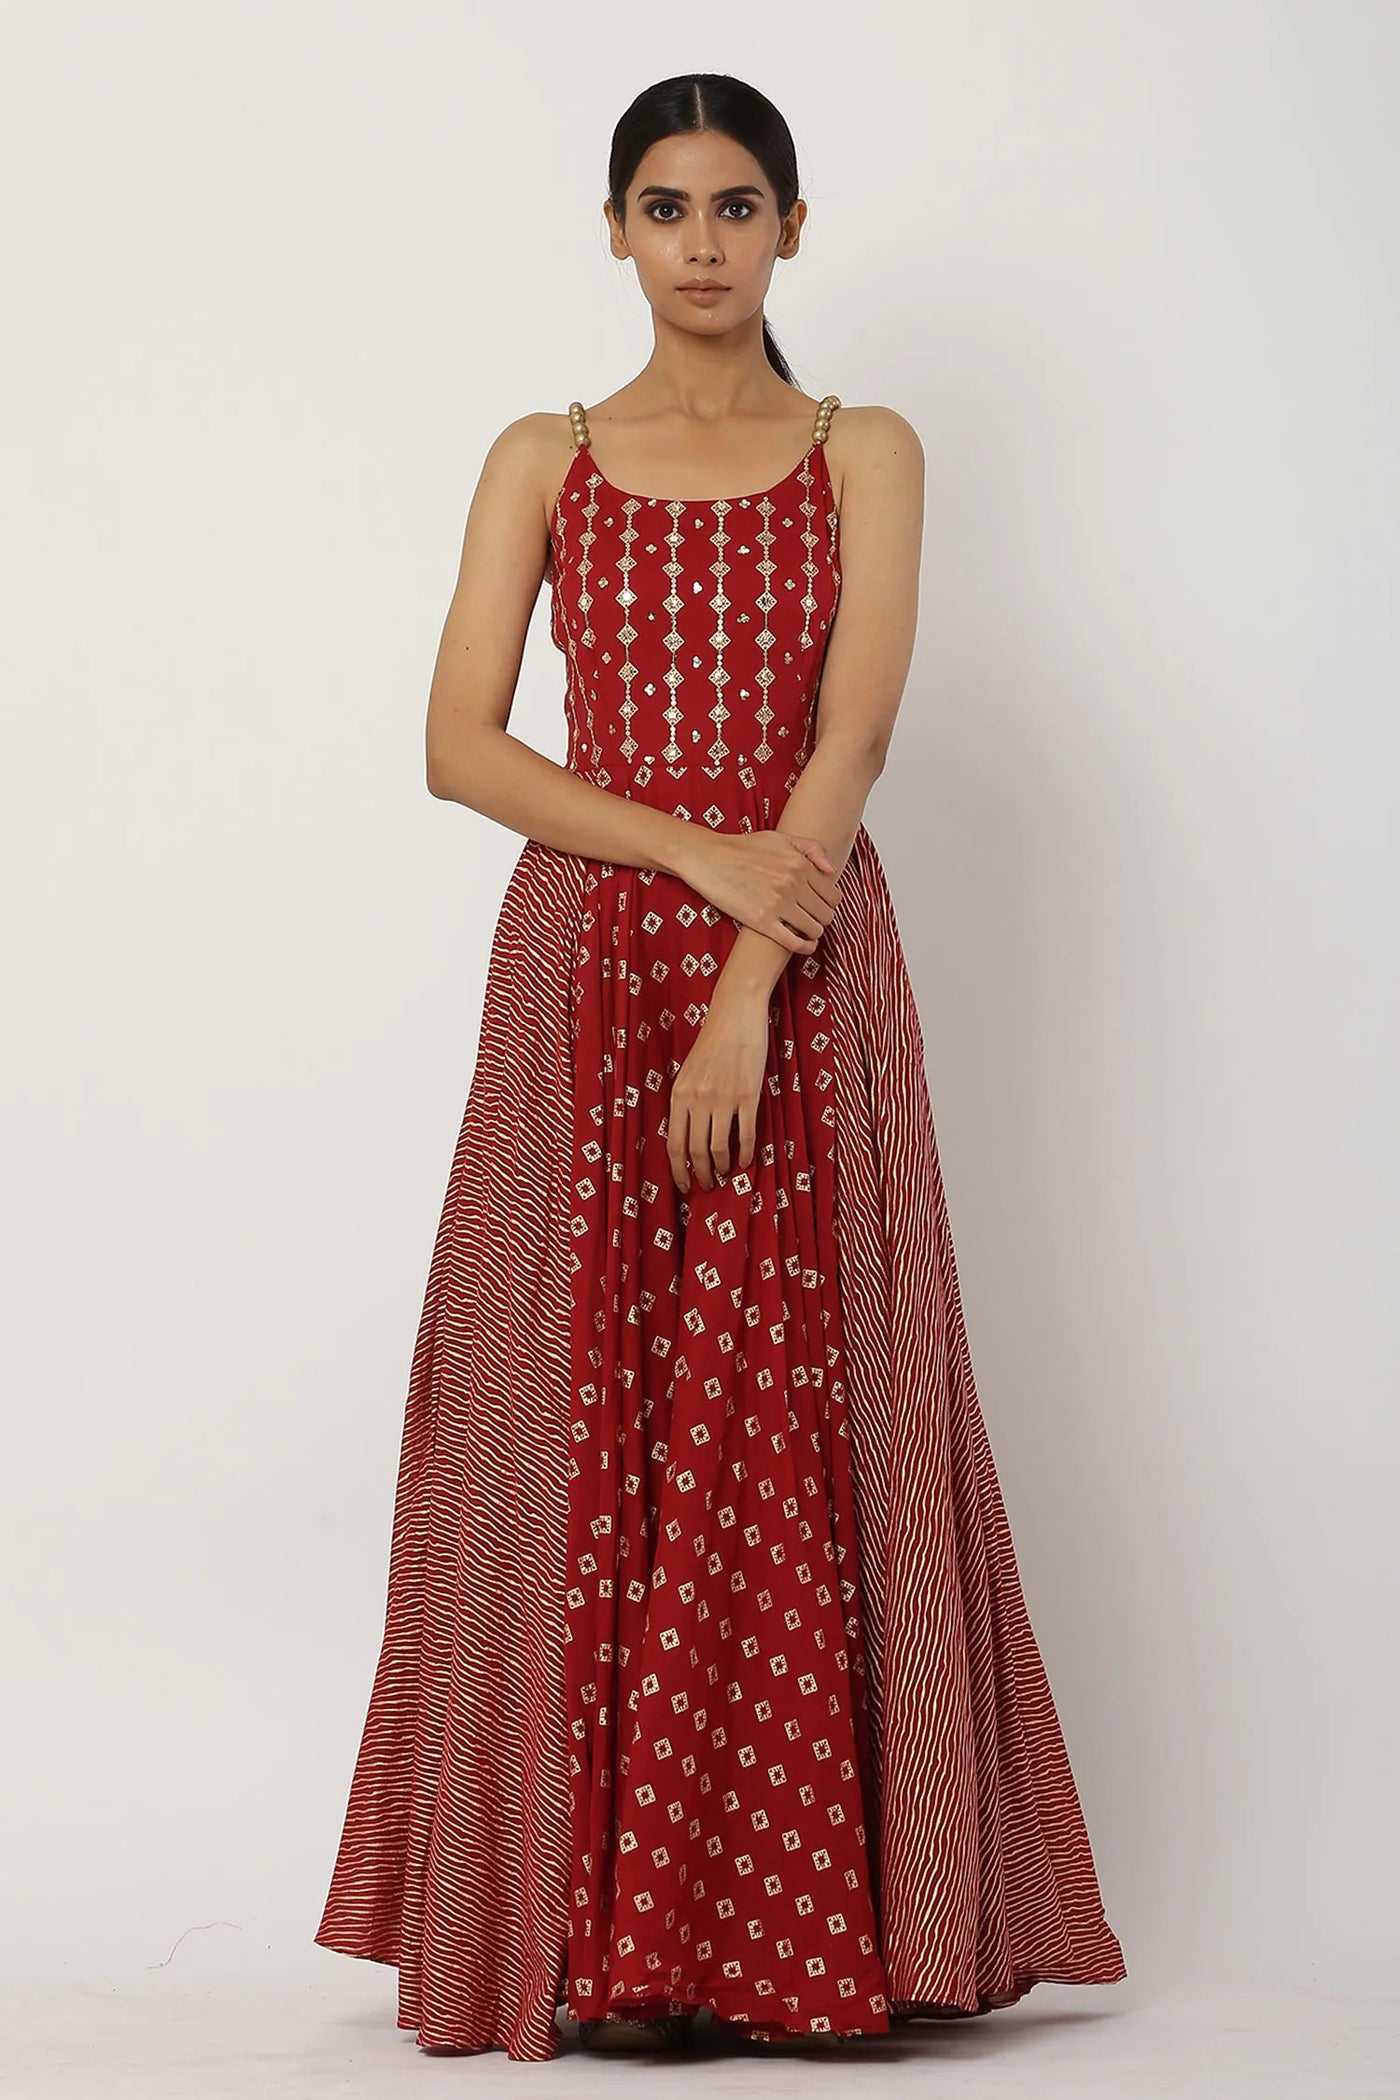 Red Beaded Anarkali Set - Indian Clothing in Denver, CO, Aurora, CO, Boulder, CO, Fort Collins, CO, Colorado Springs, CO, Parker, CO, Highlands Ranch, CO, Cherry Creek, CO, Centennial, CO, and Longmont, CO. Nationwide shipping USA - India Fashion X